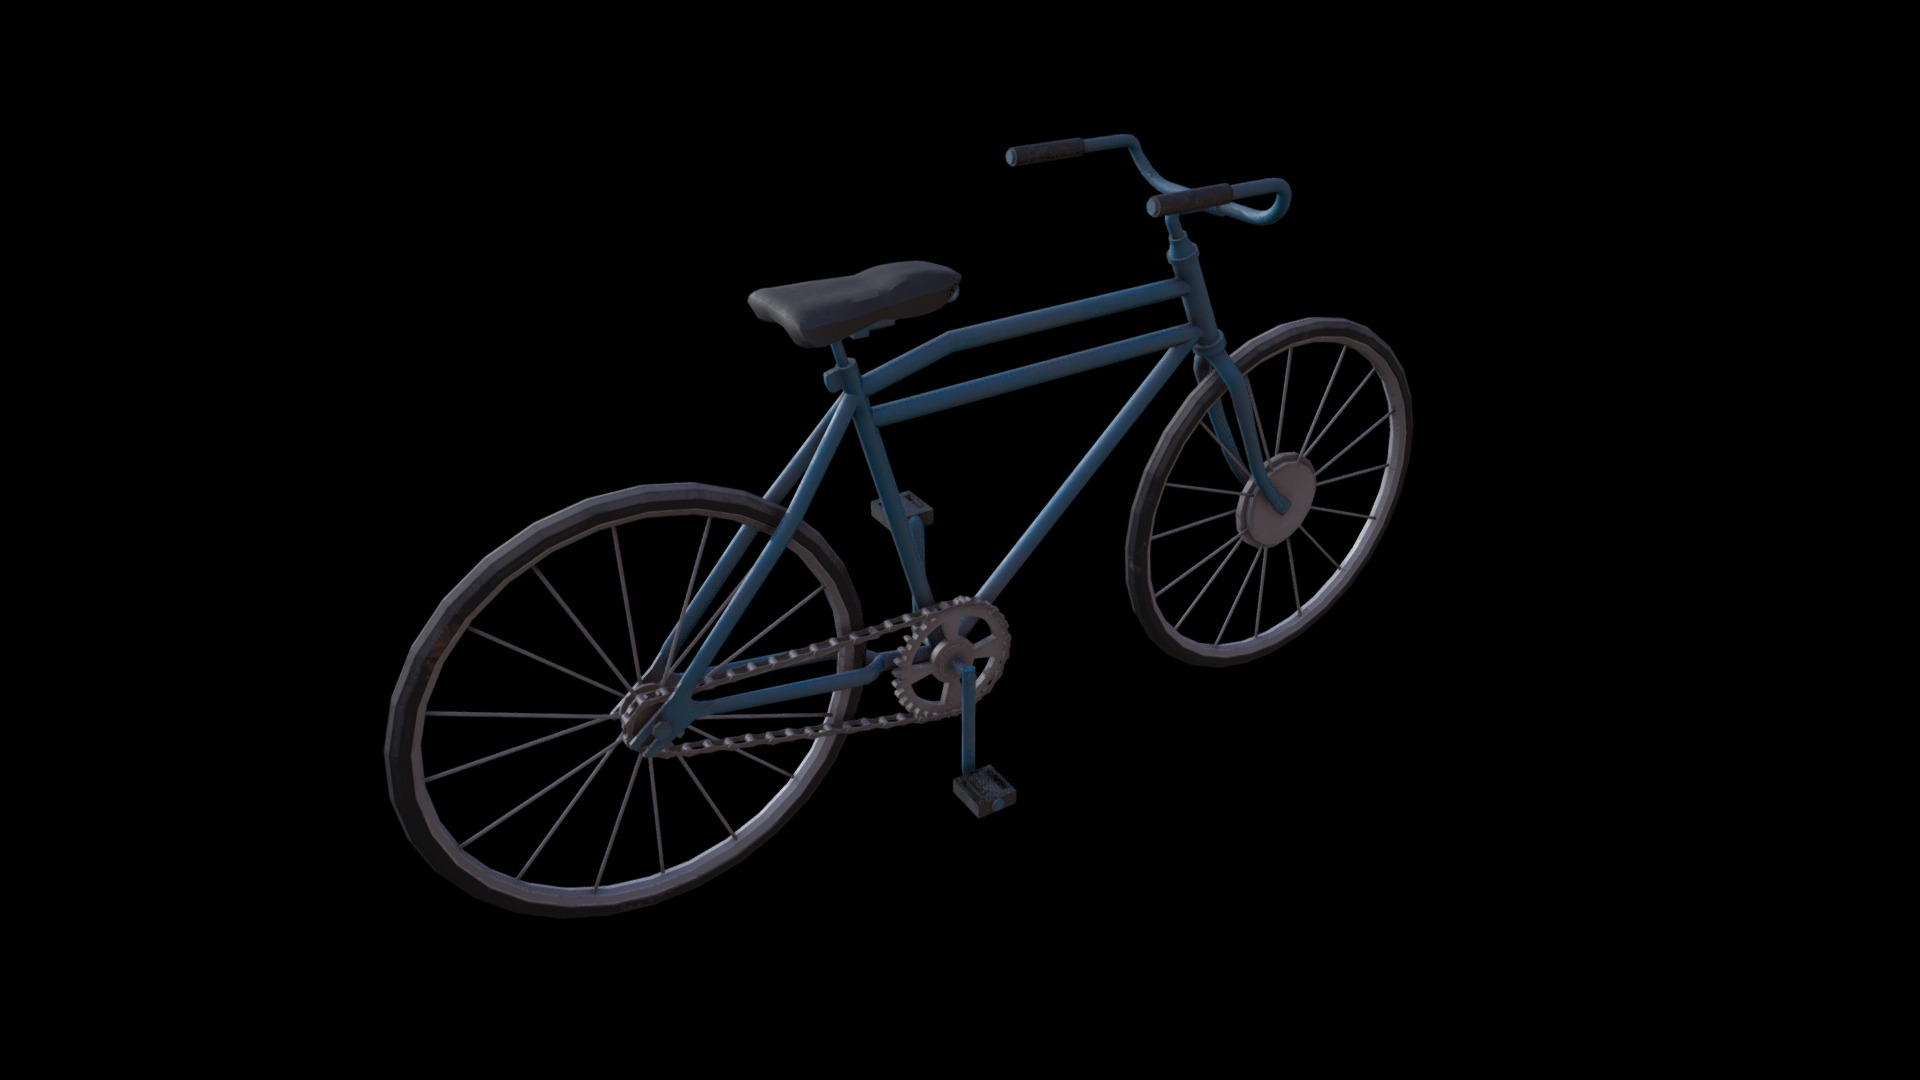 3D model Old bike - This is a 3D model of the Old bike. The 3D model is about a bicycle with a black background.